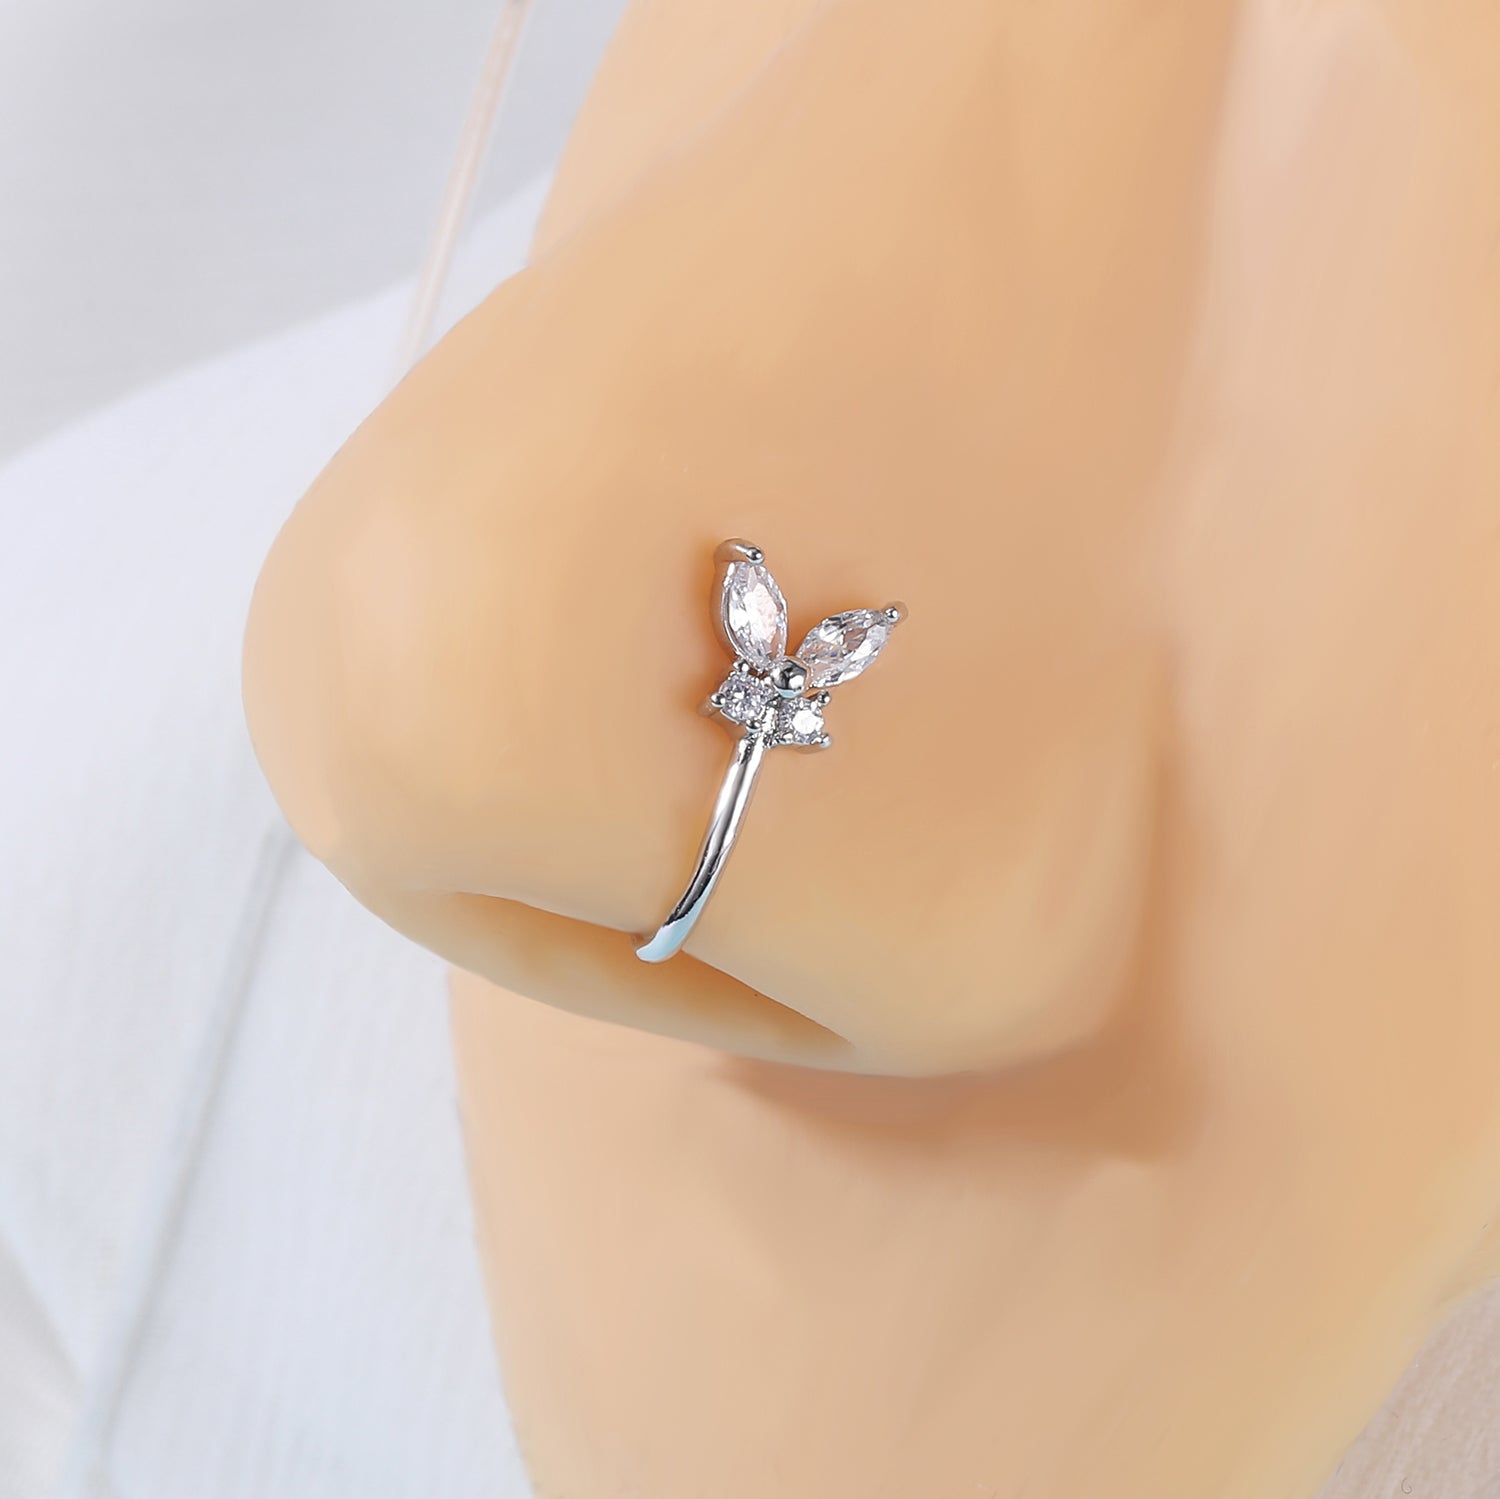 zs-white-zircon-butterfly-u-shaped-nose-clip-simple-stainless-steel-fake-nose-ring